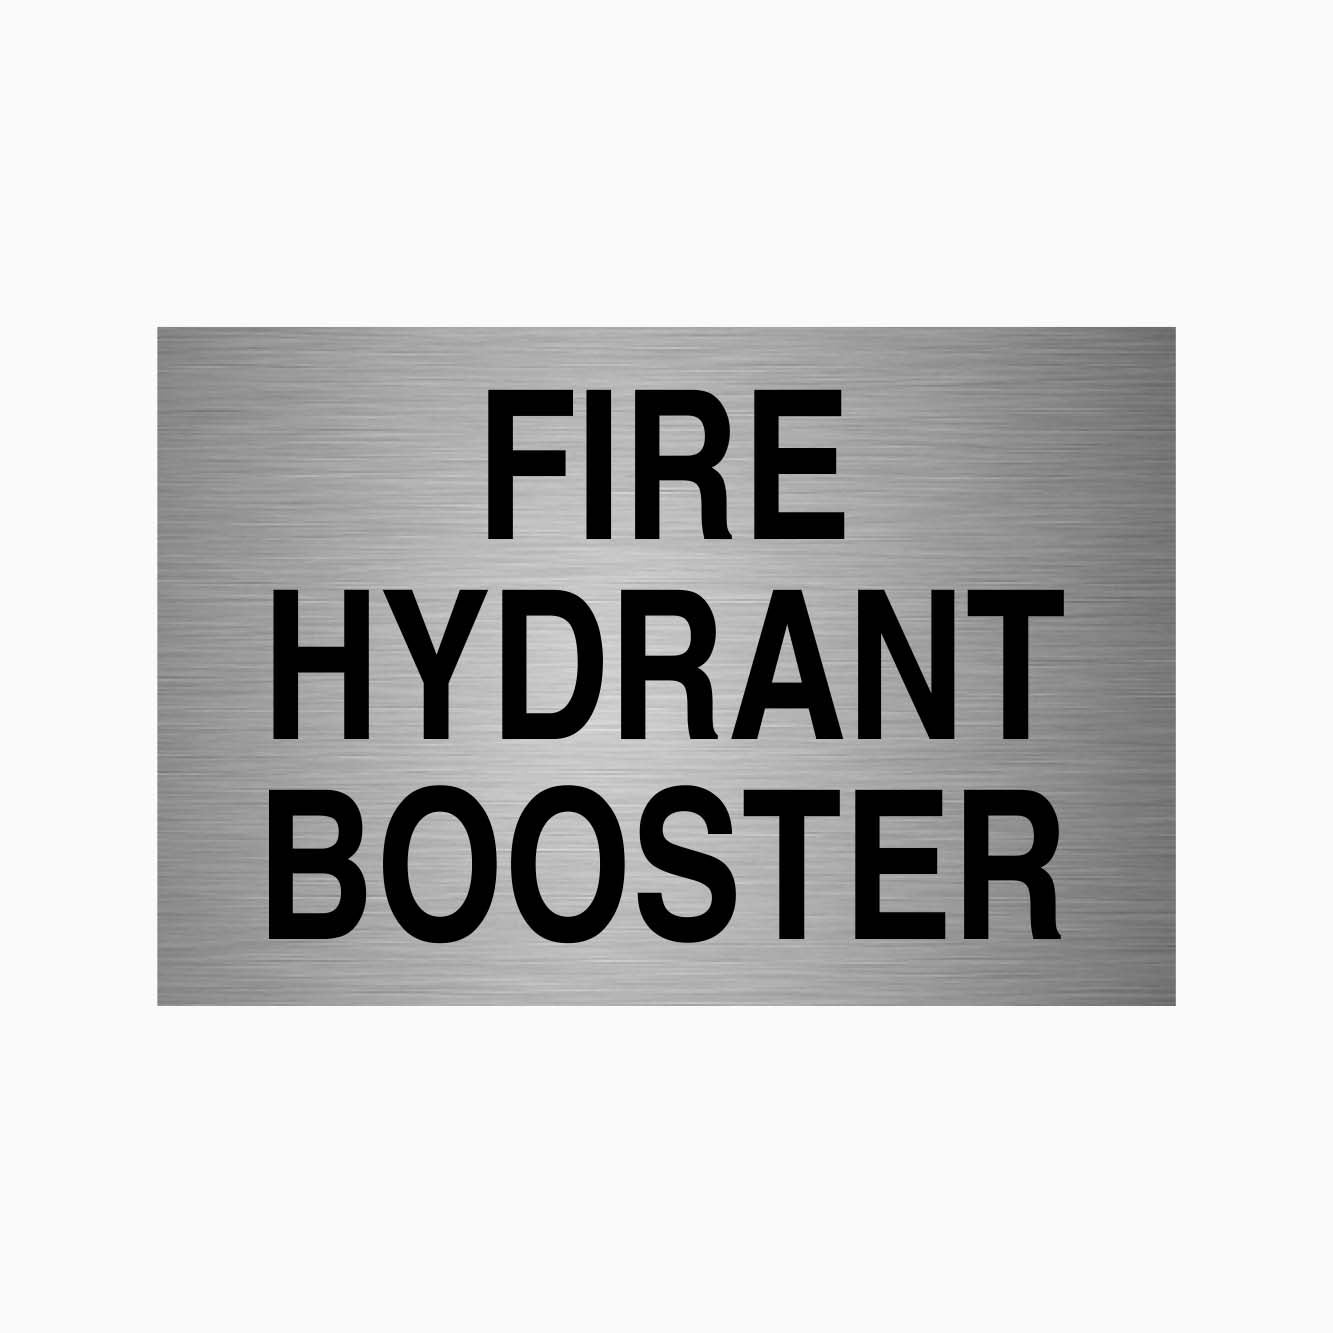 FIRE HYDRANT BOOSTER - STATUTORY SIGNS AT GET SIGNS